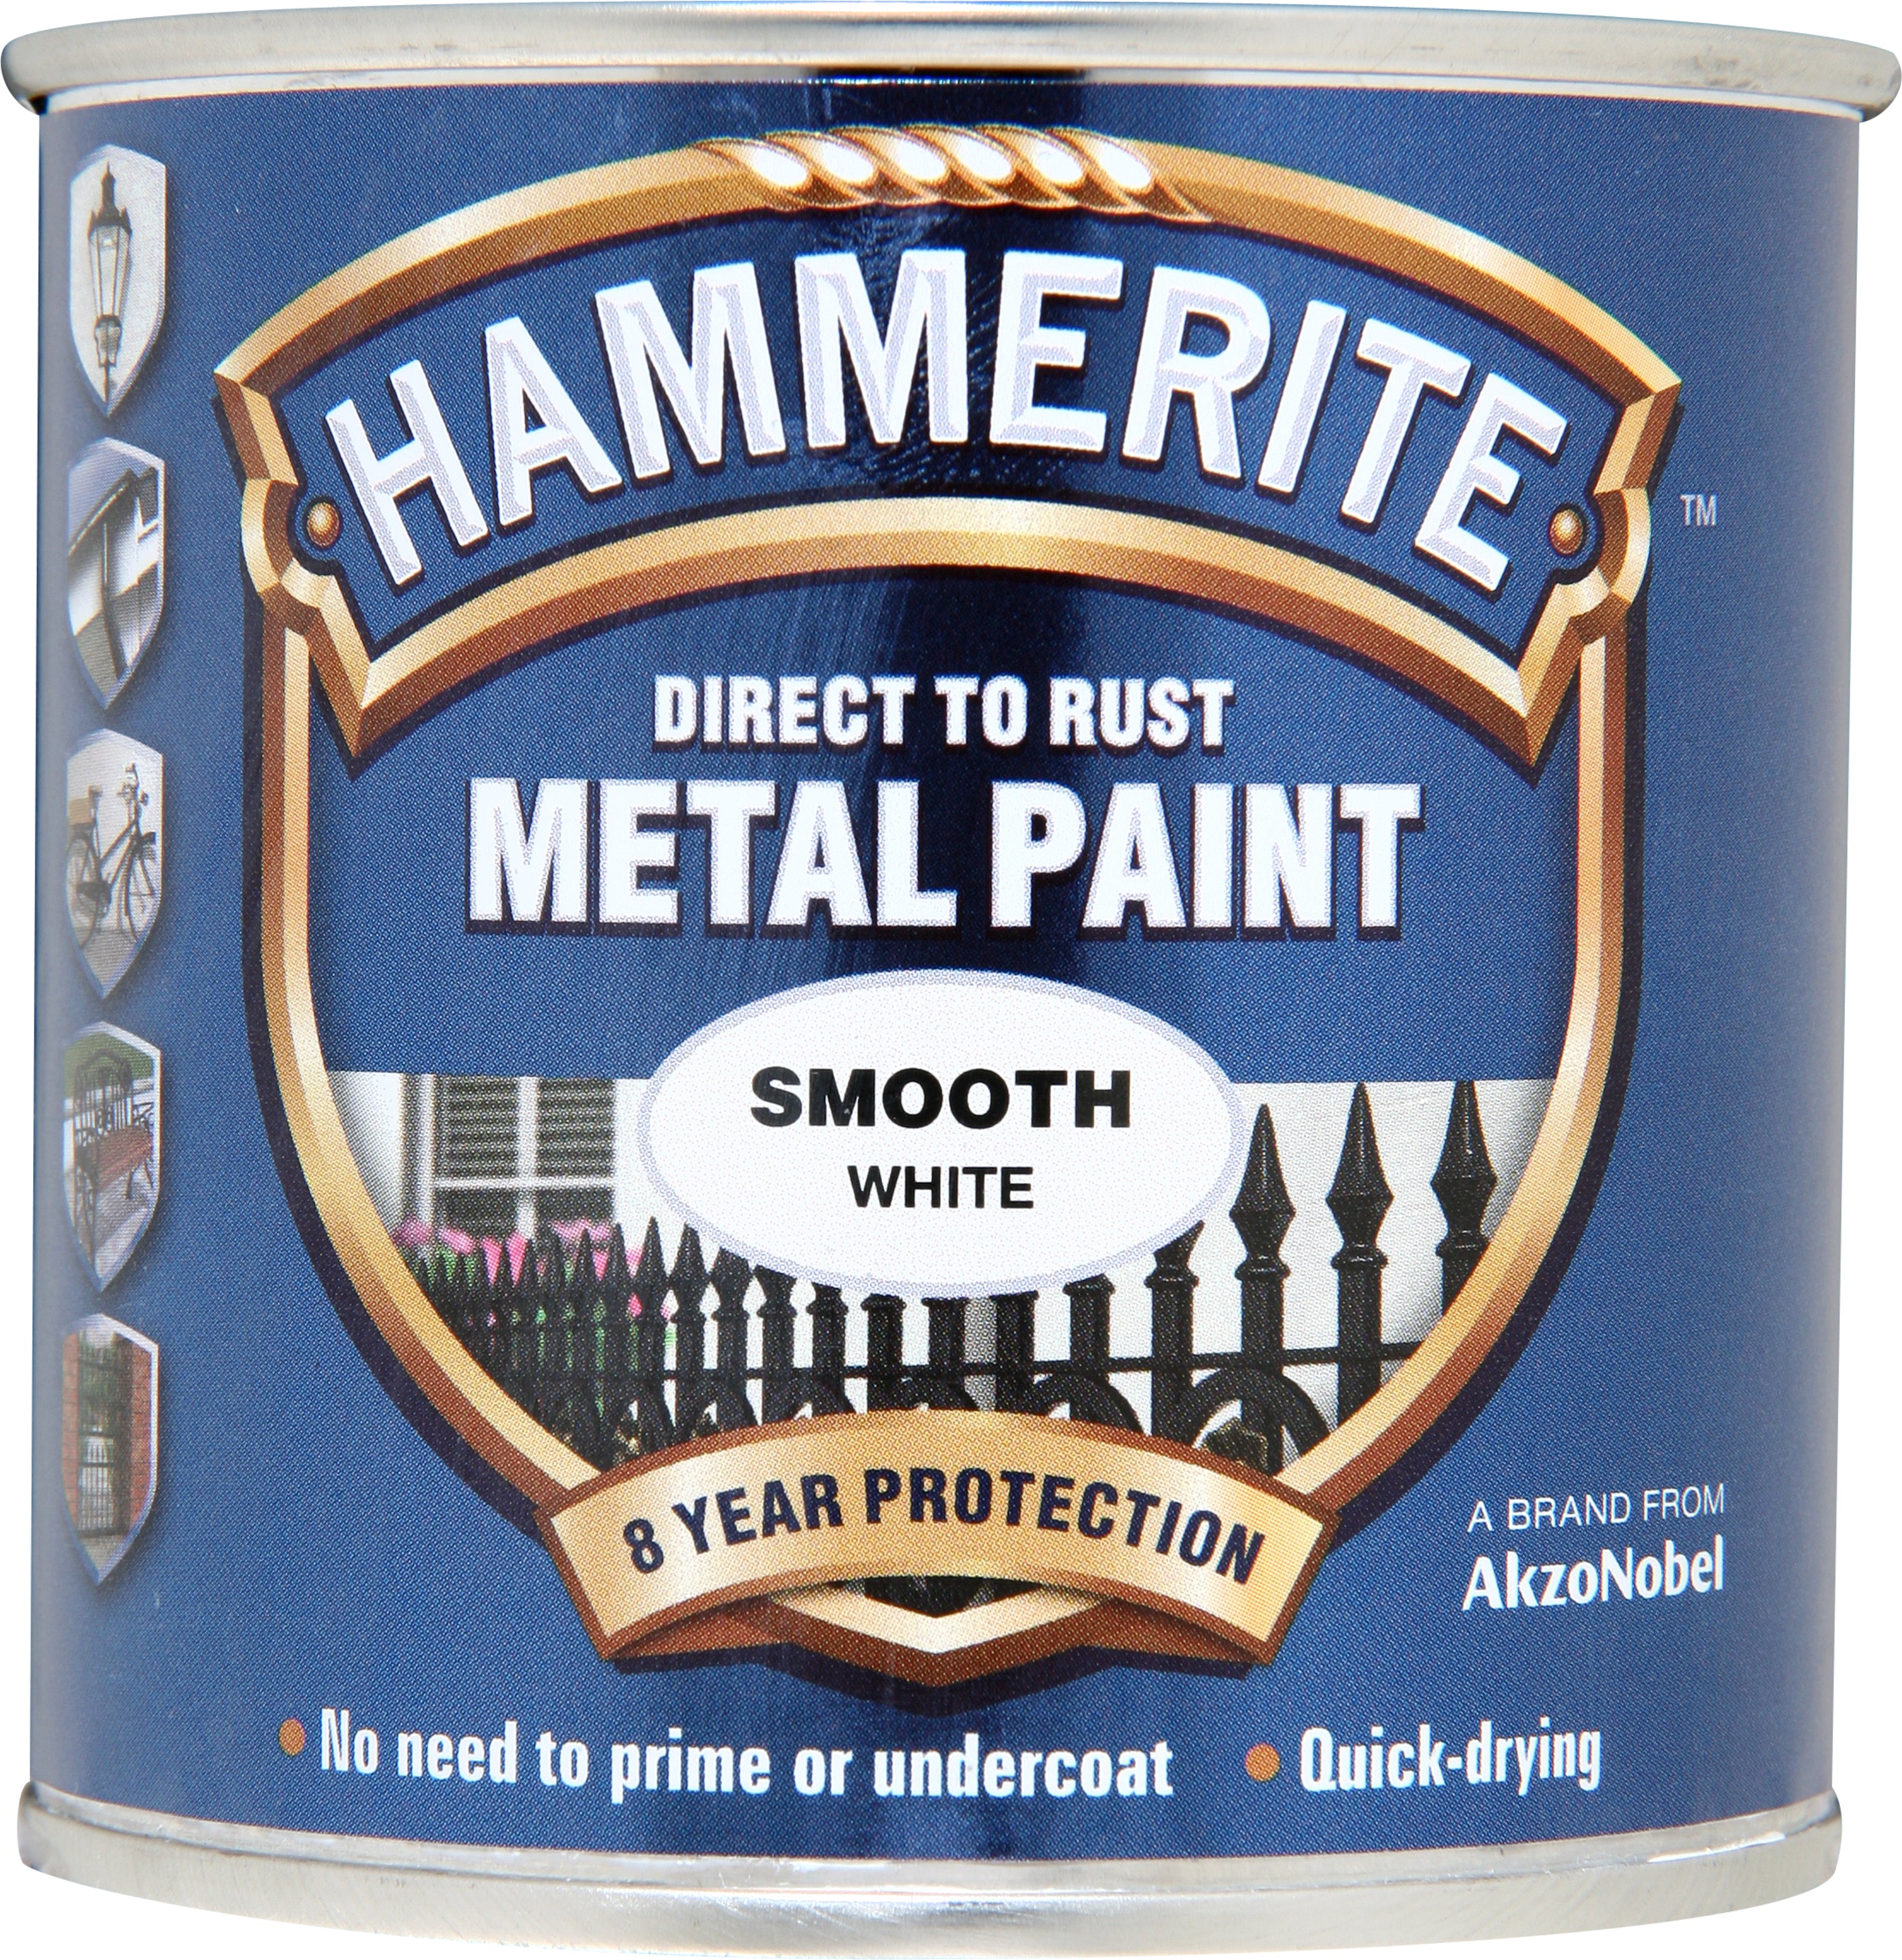 Direct to Rust Metal Paint Smooth Finish - White